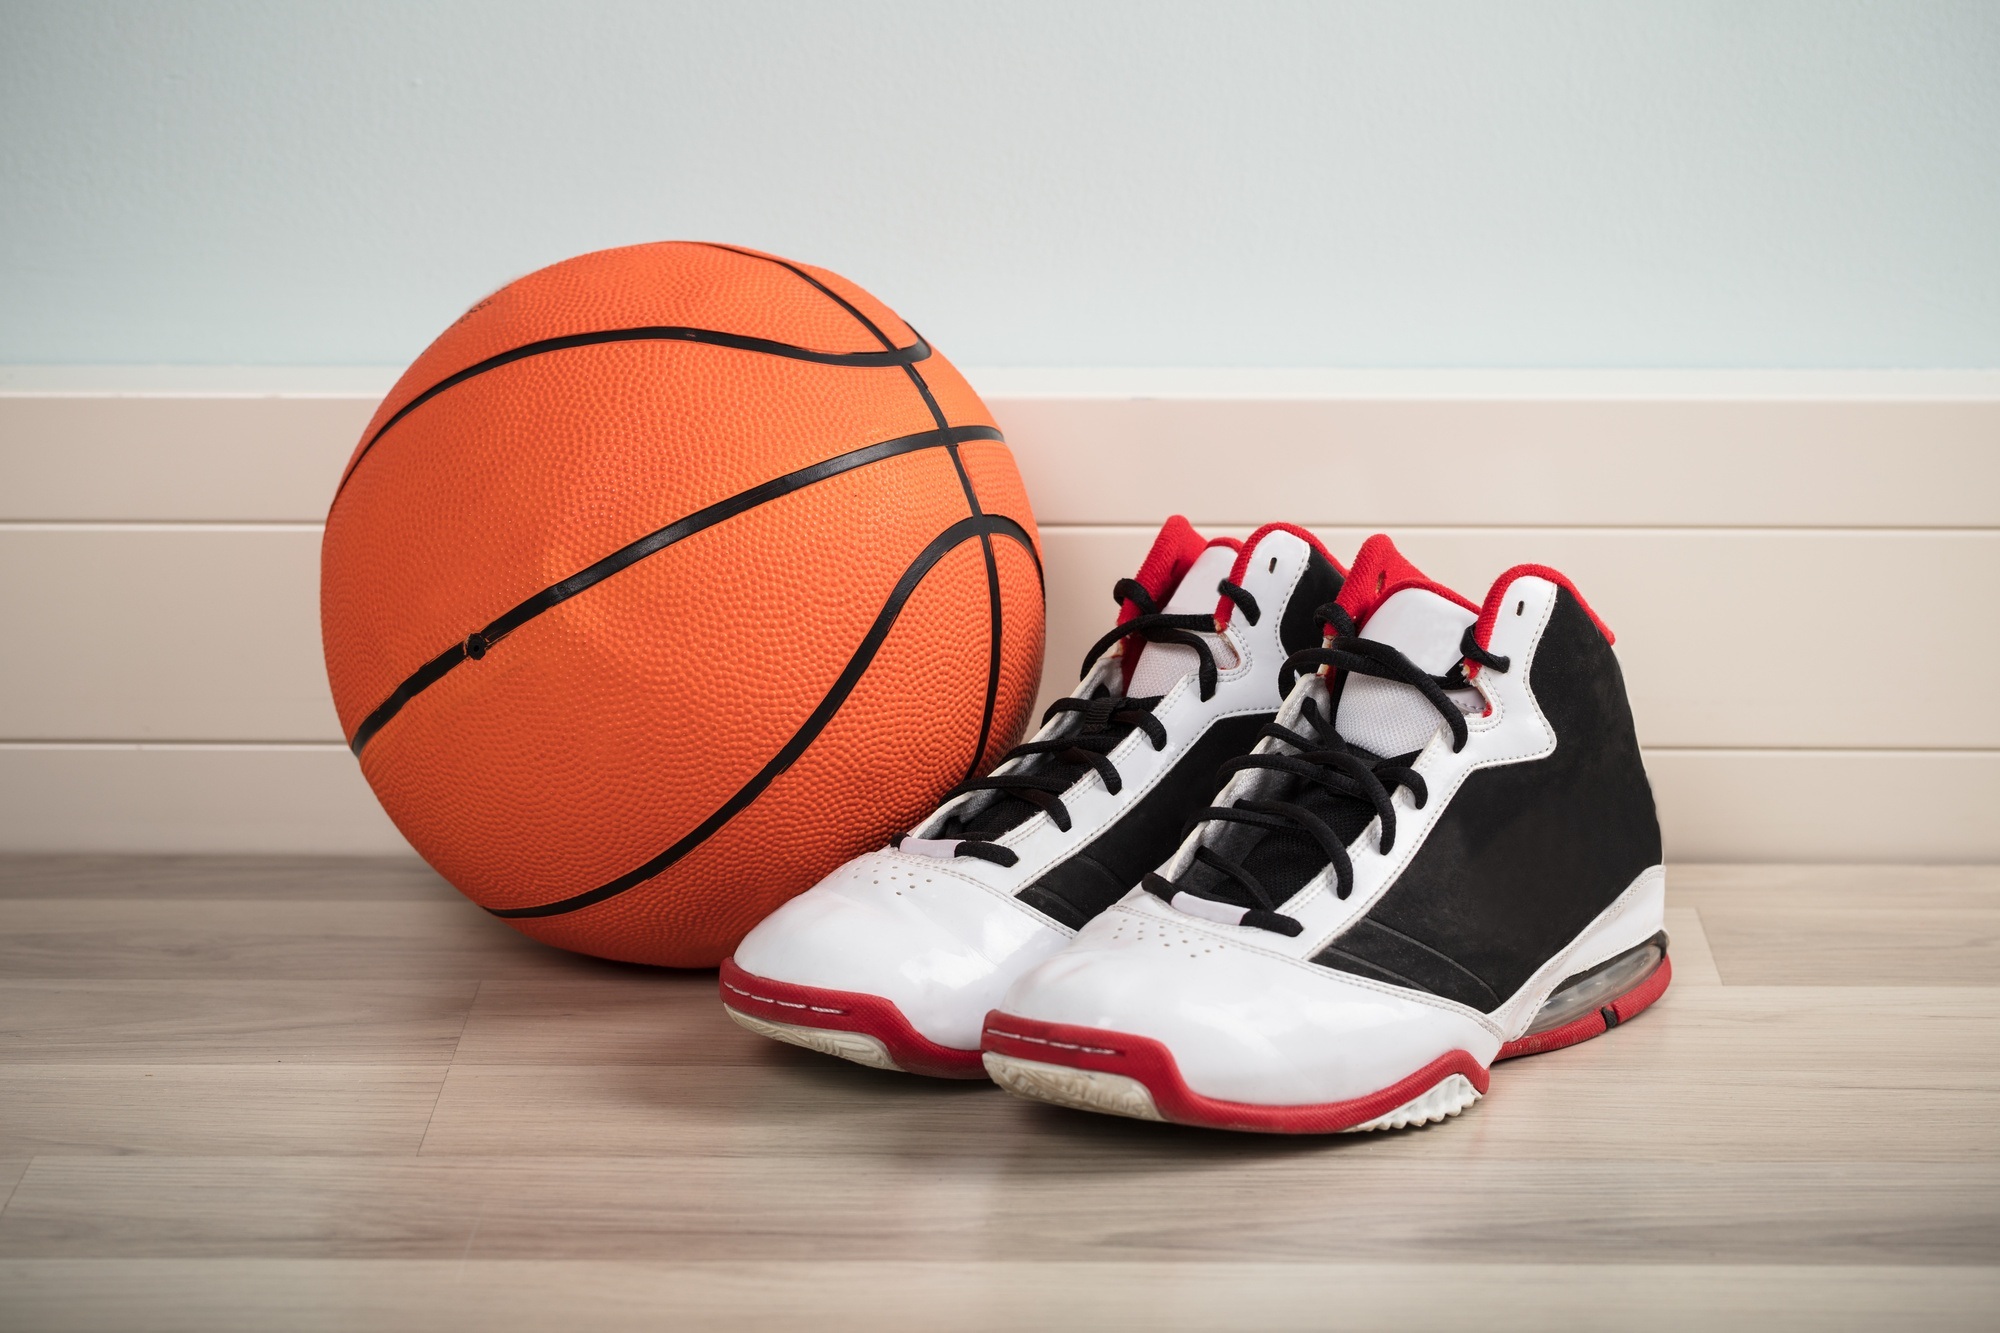 most popular basketball shoes in the nba